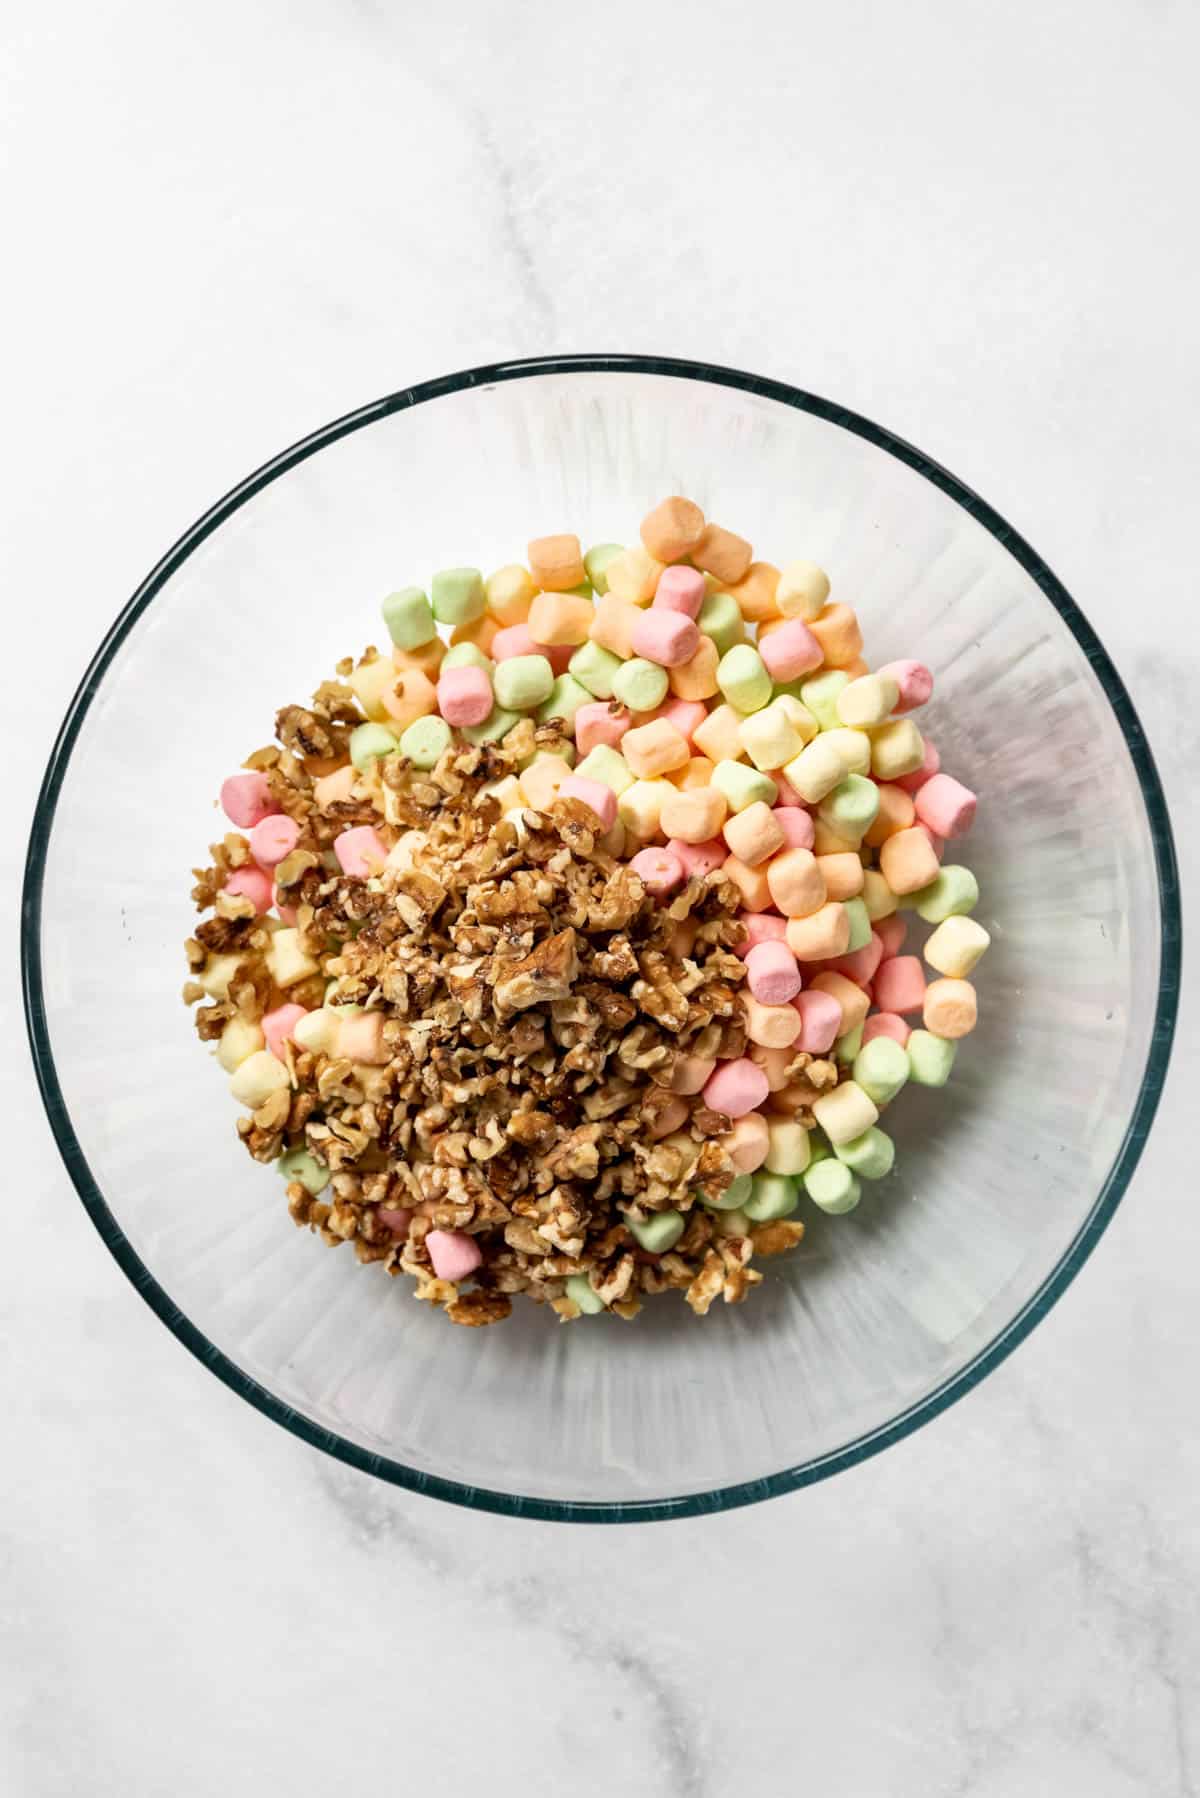 A glass bowl with multi-colored marshmallows and chopped walnuts.